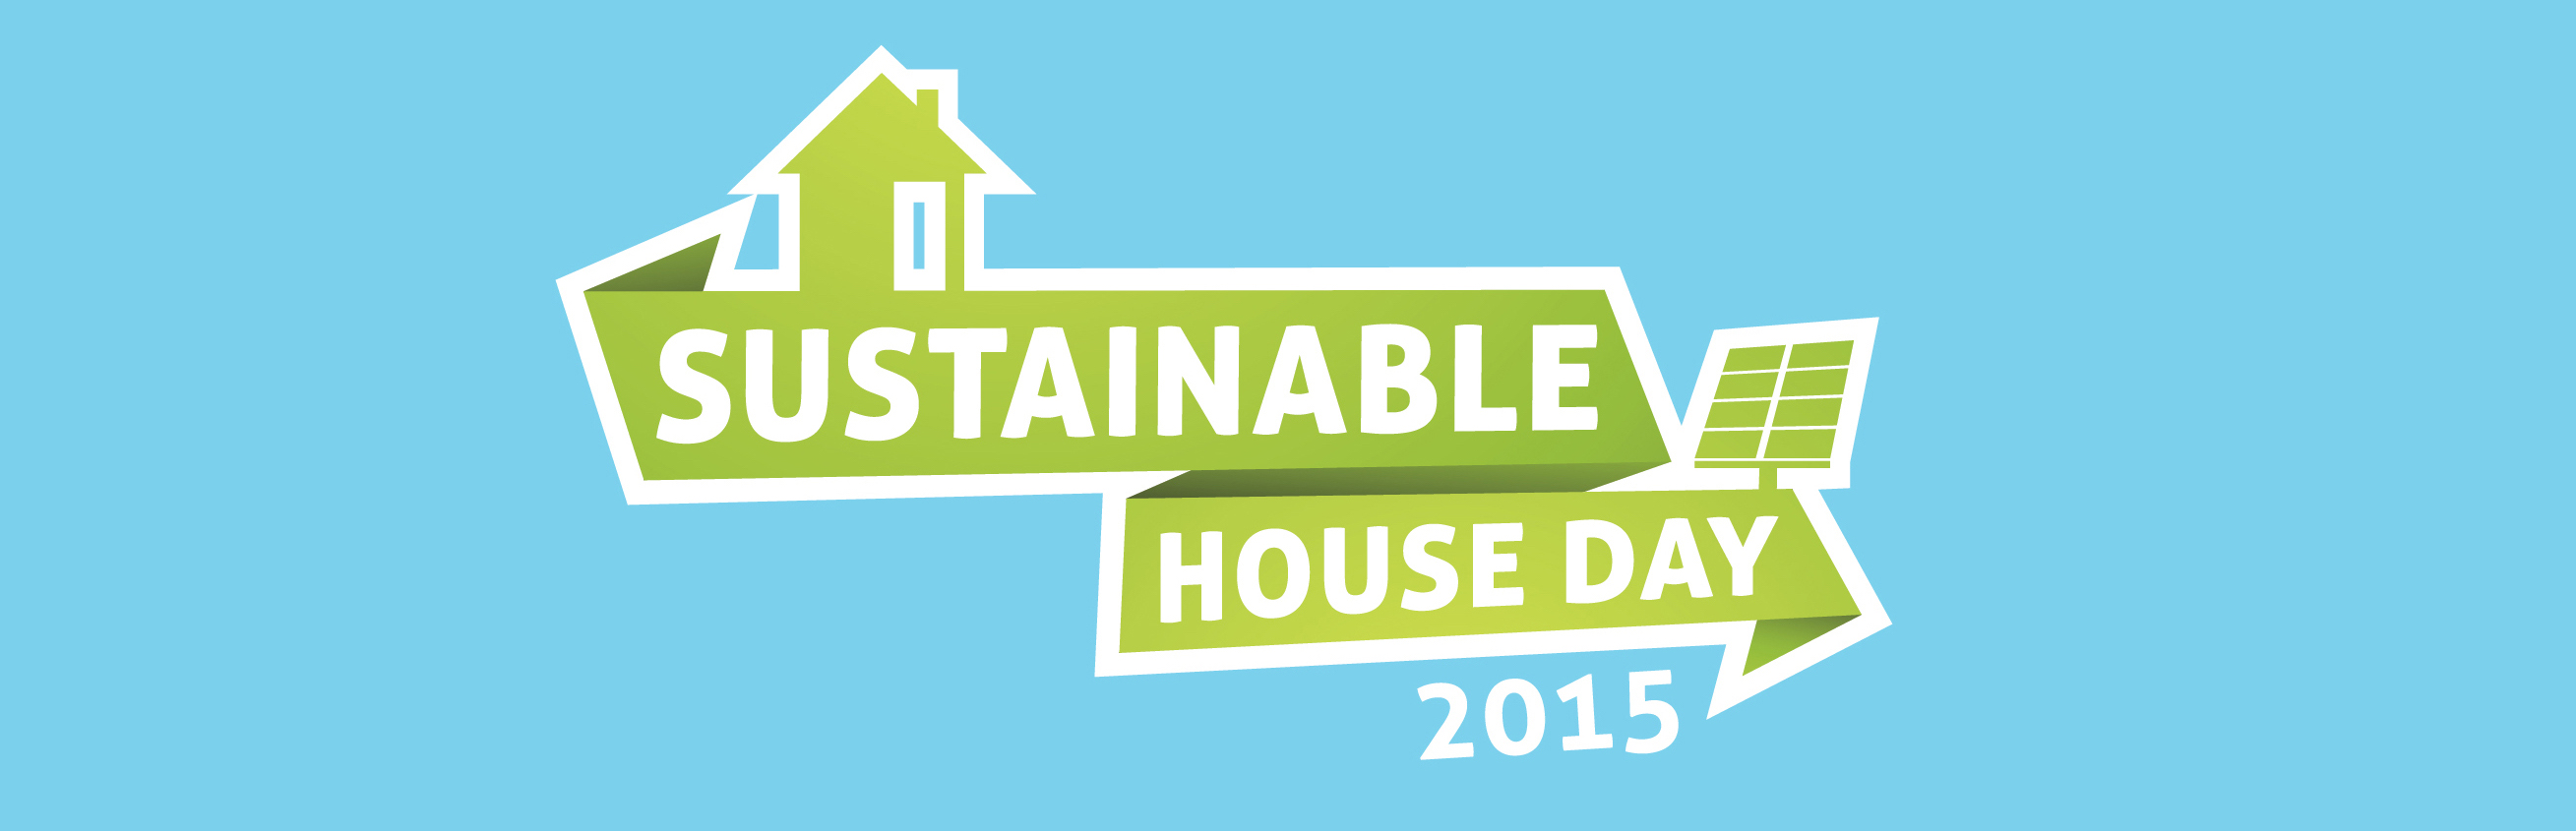 Sustainable House Day Logos 6